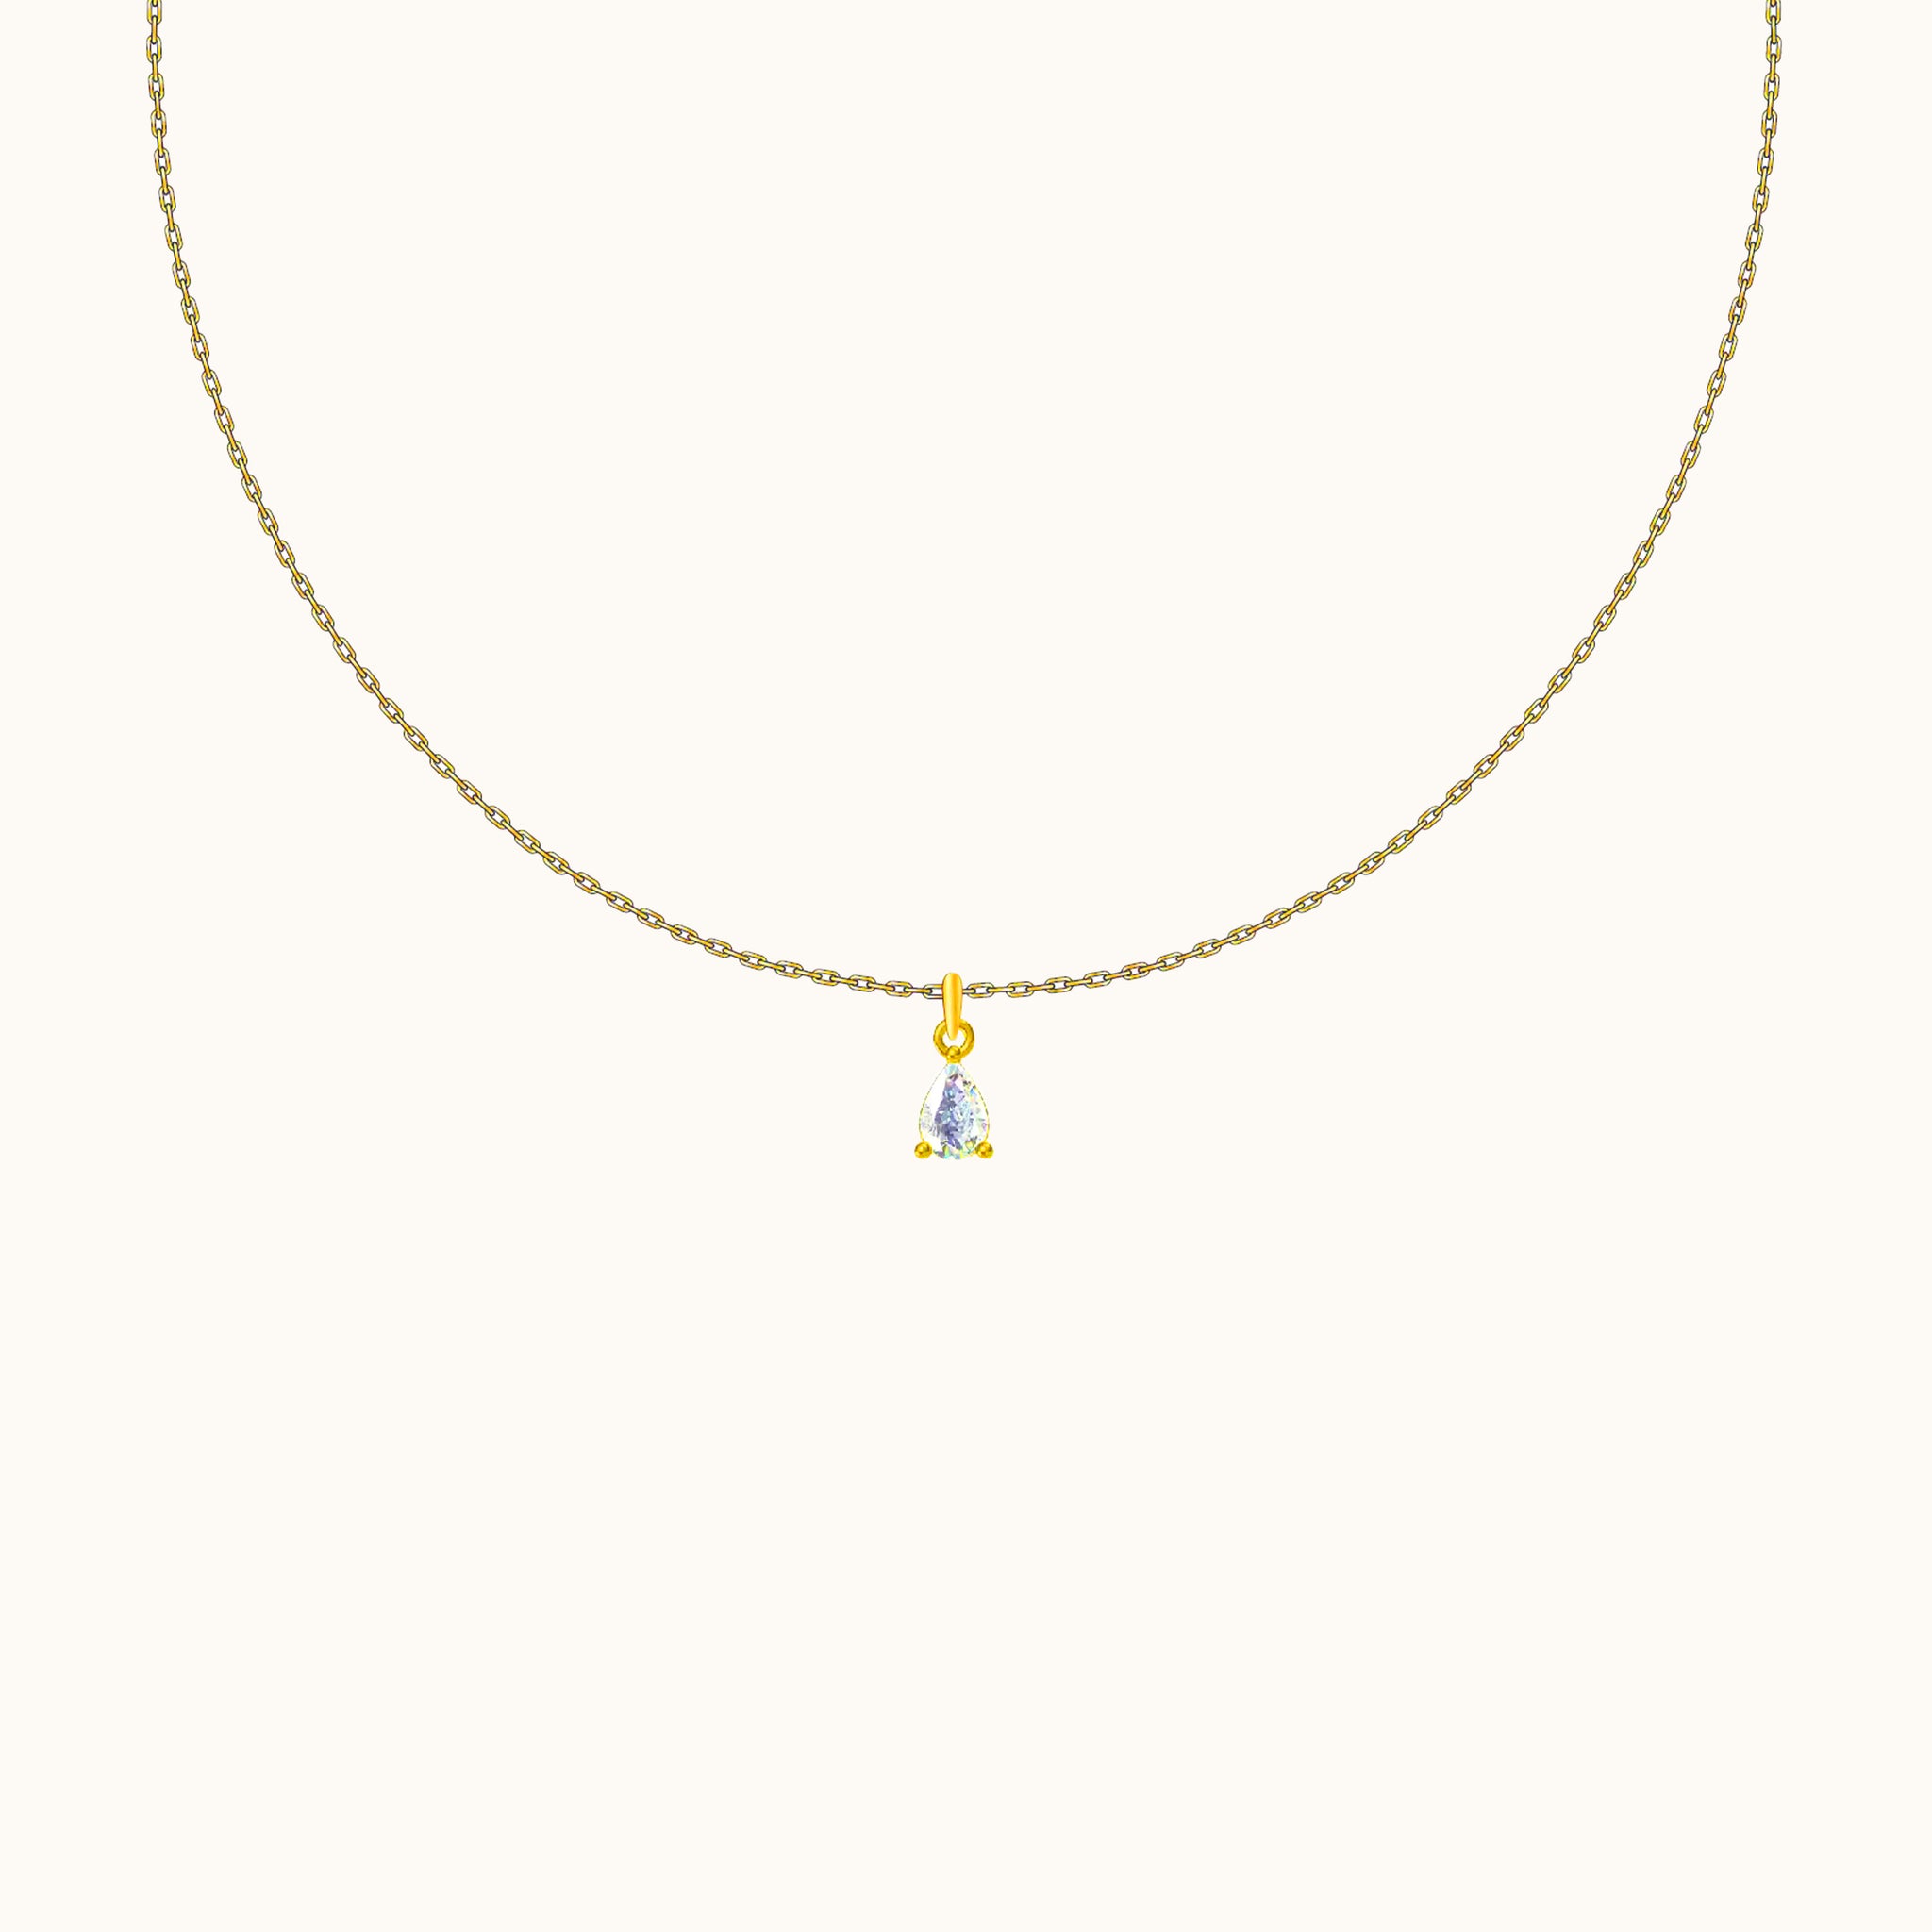 Gemstone Charm with Gold Cable White Oval CZ Waterdrop Pendant Necklace by Doviana